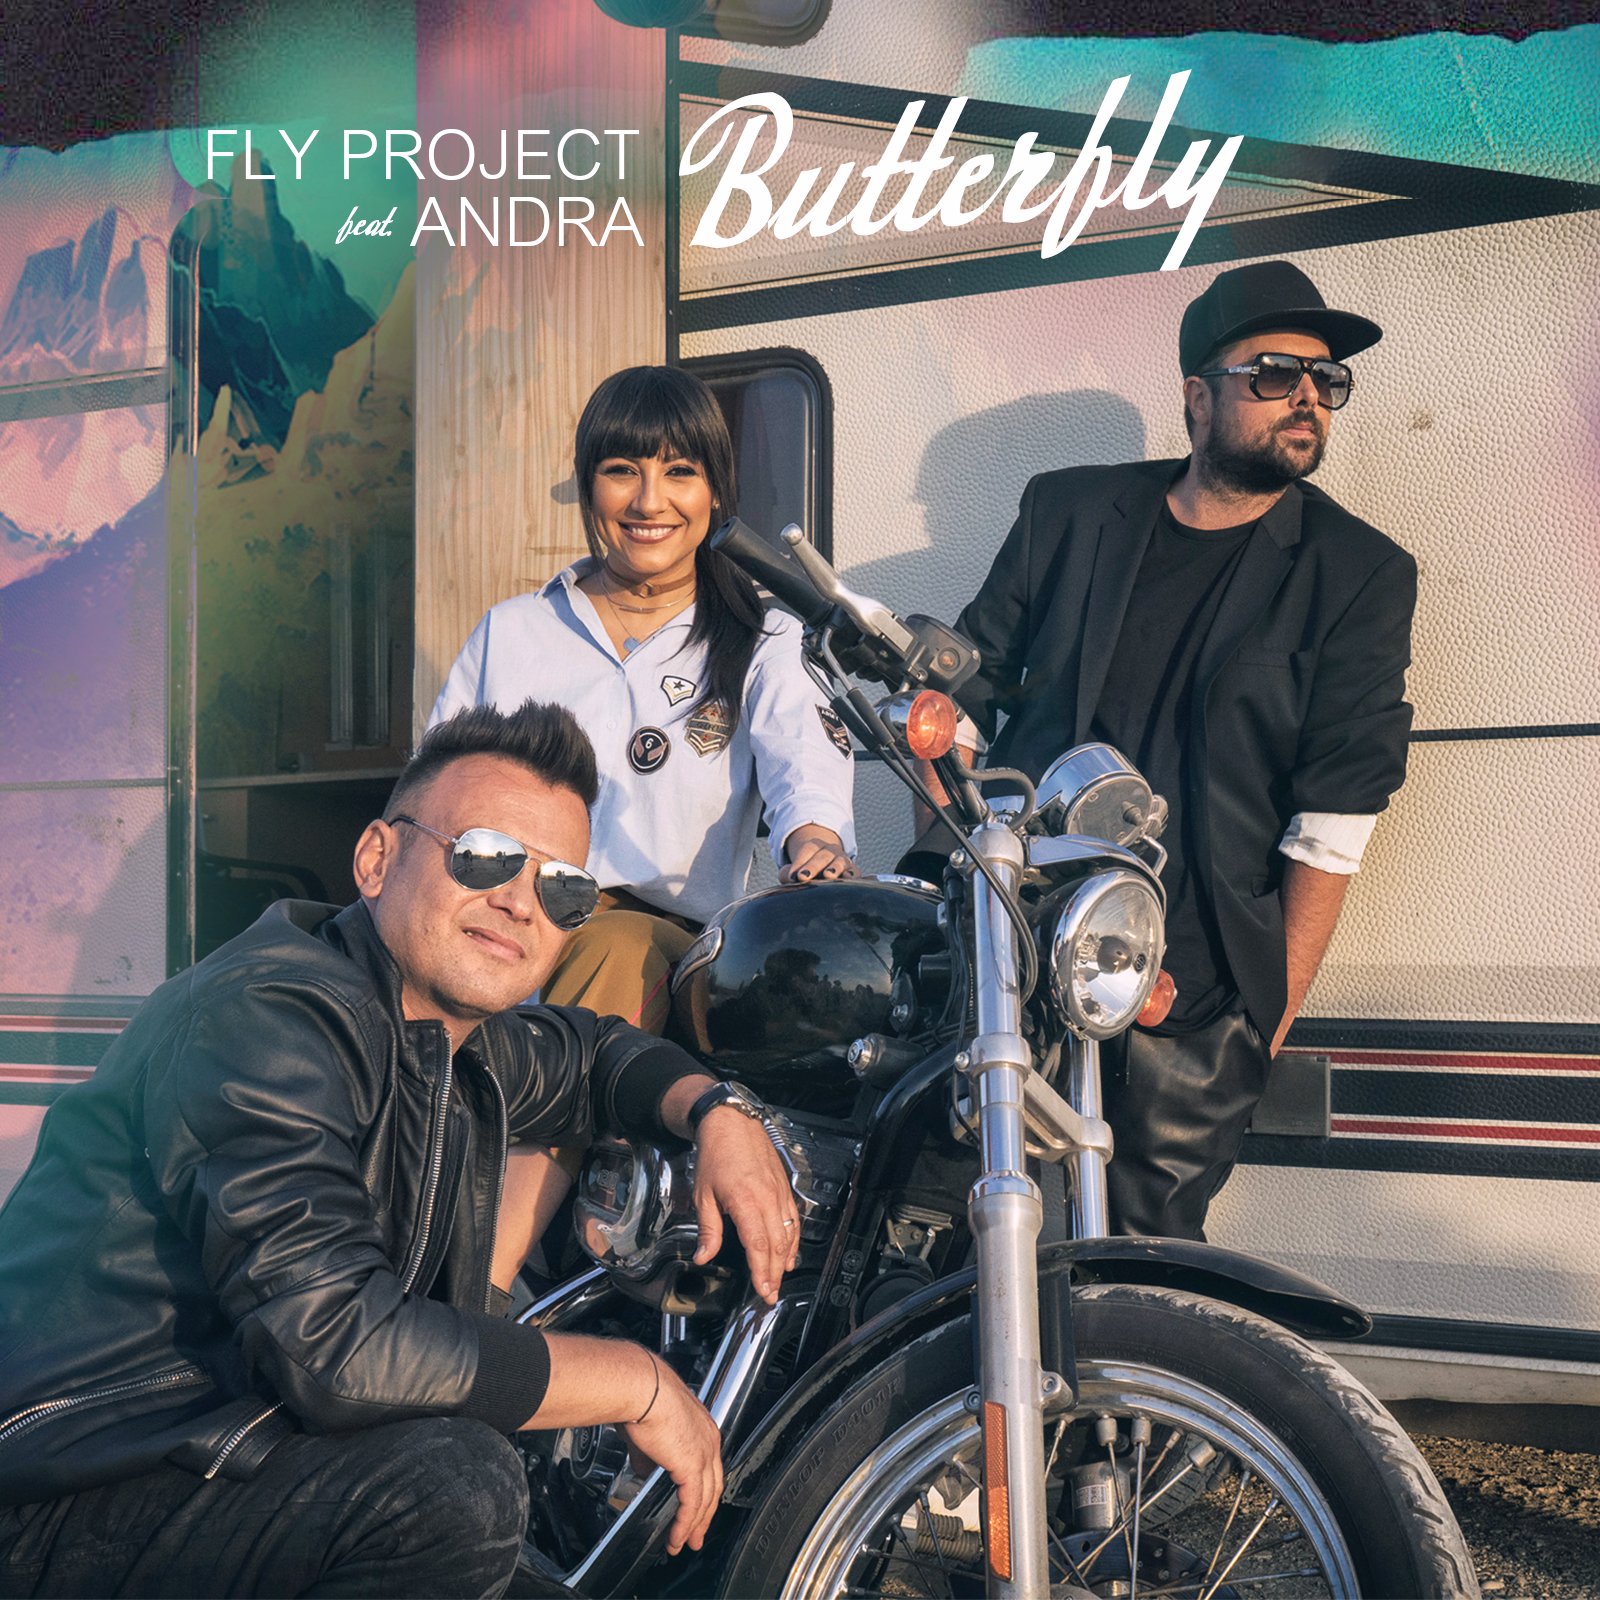 Fly Project feat. Andra, „Butterfly” (artwork)